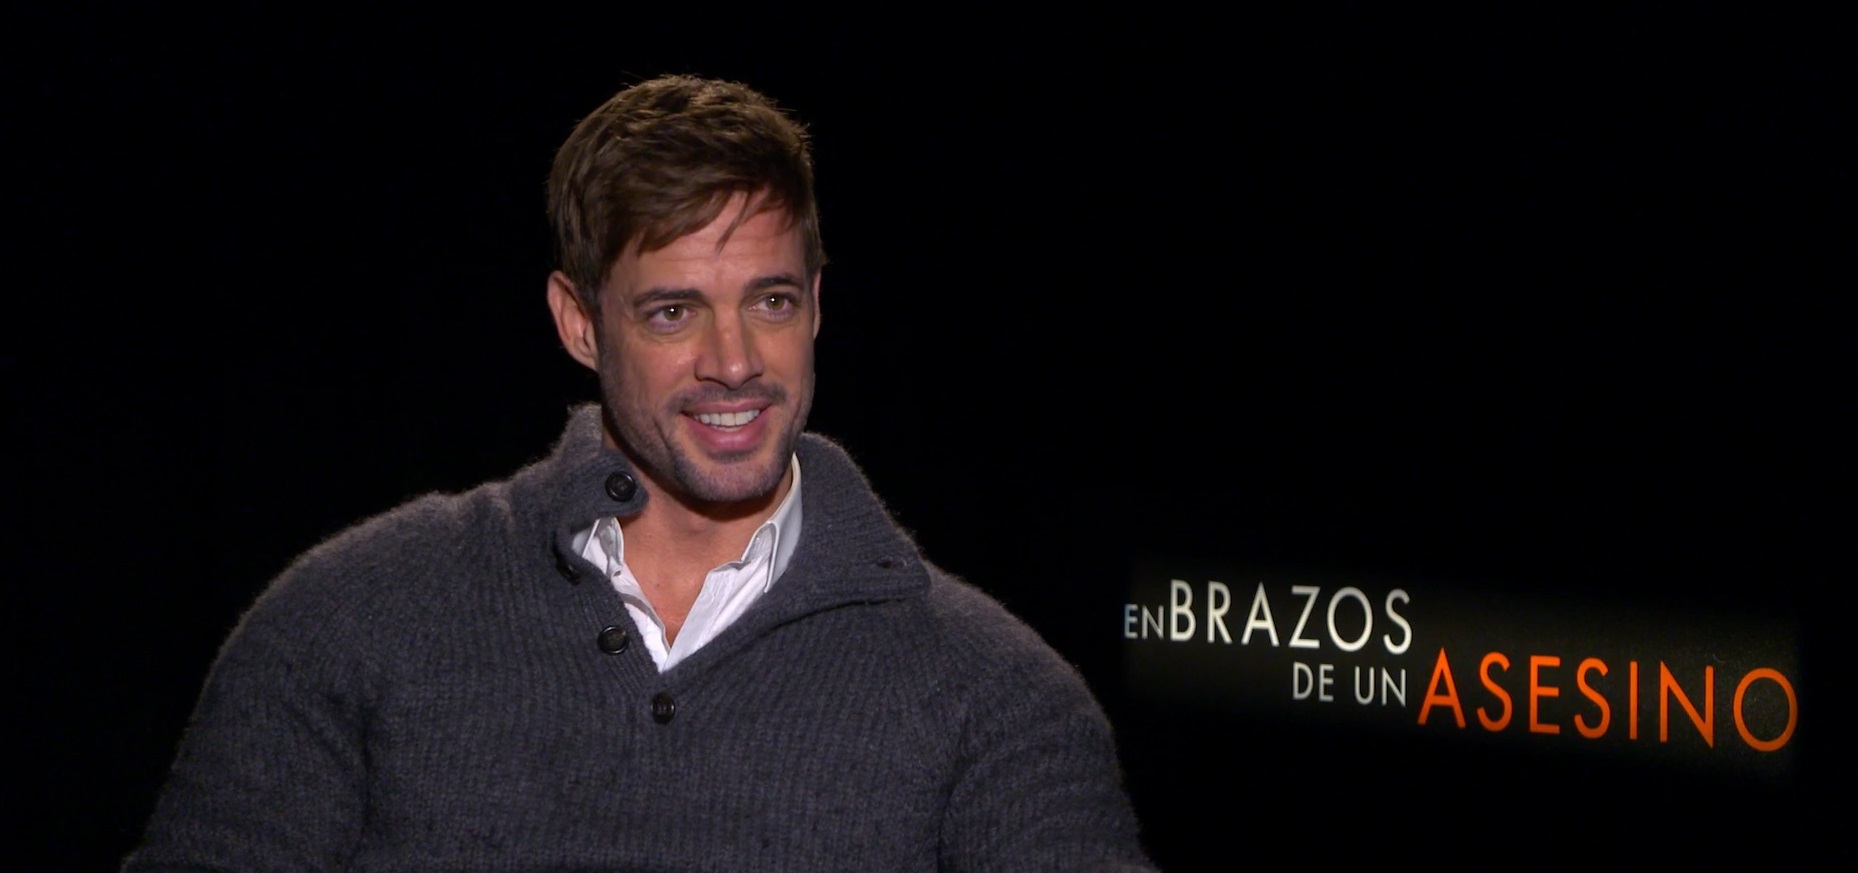 En Brazos De Un Asesino: William Levy on Creating The Film For Spanish Audiences [Exclusive Interview]